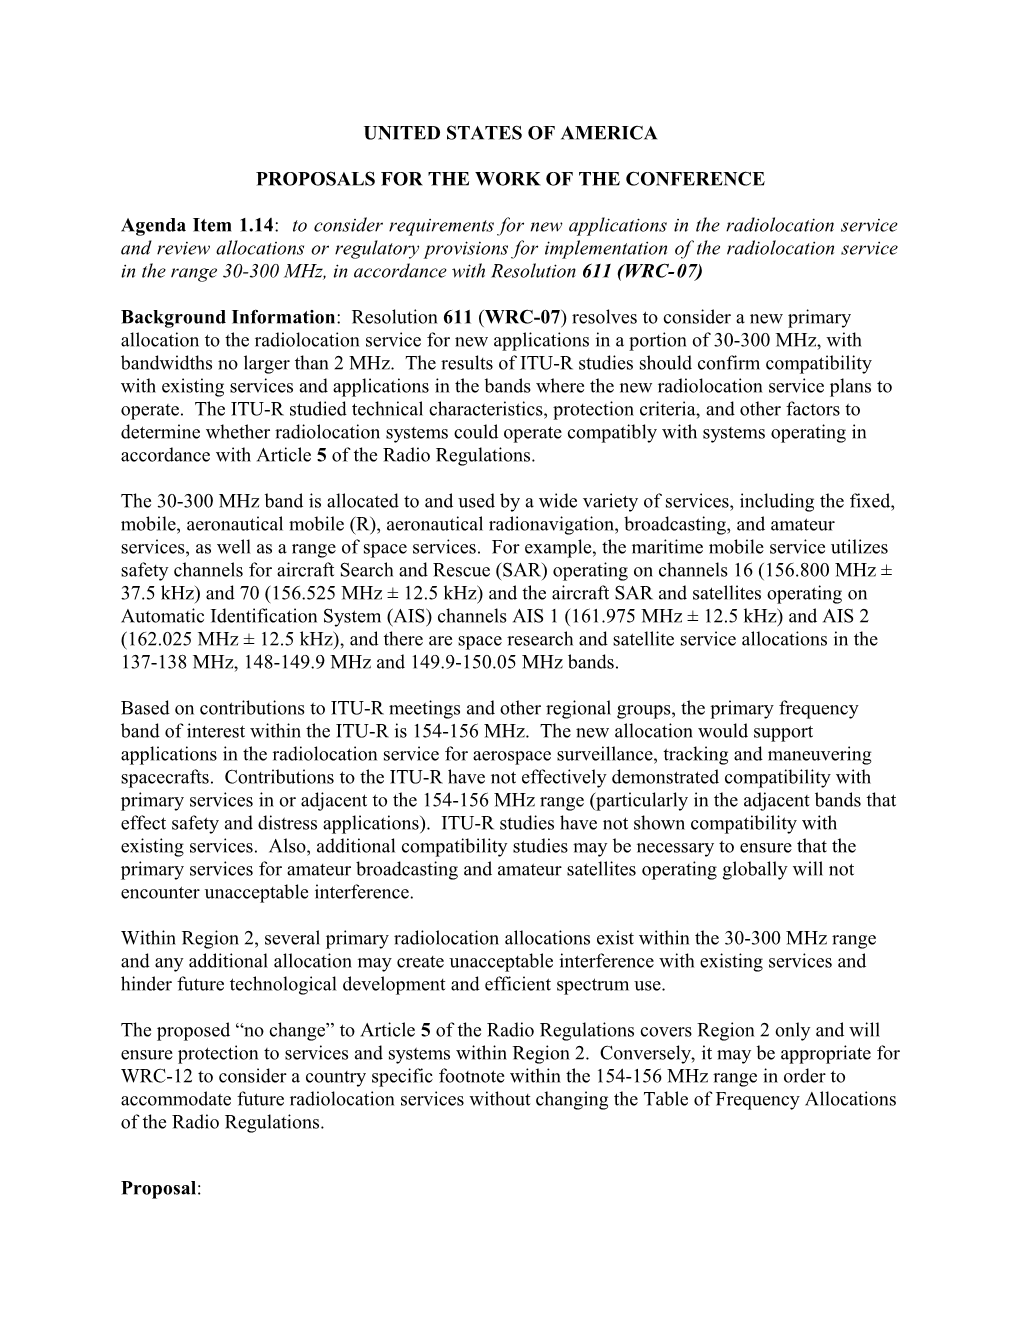 Proposals for the Work of the Conference